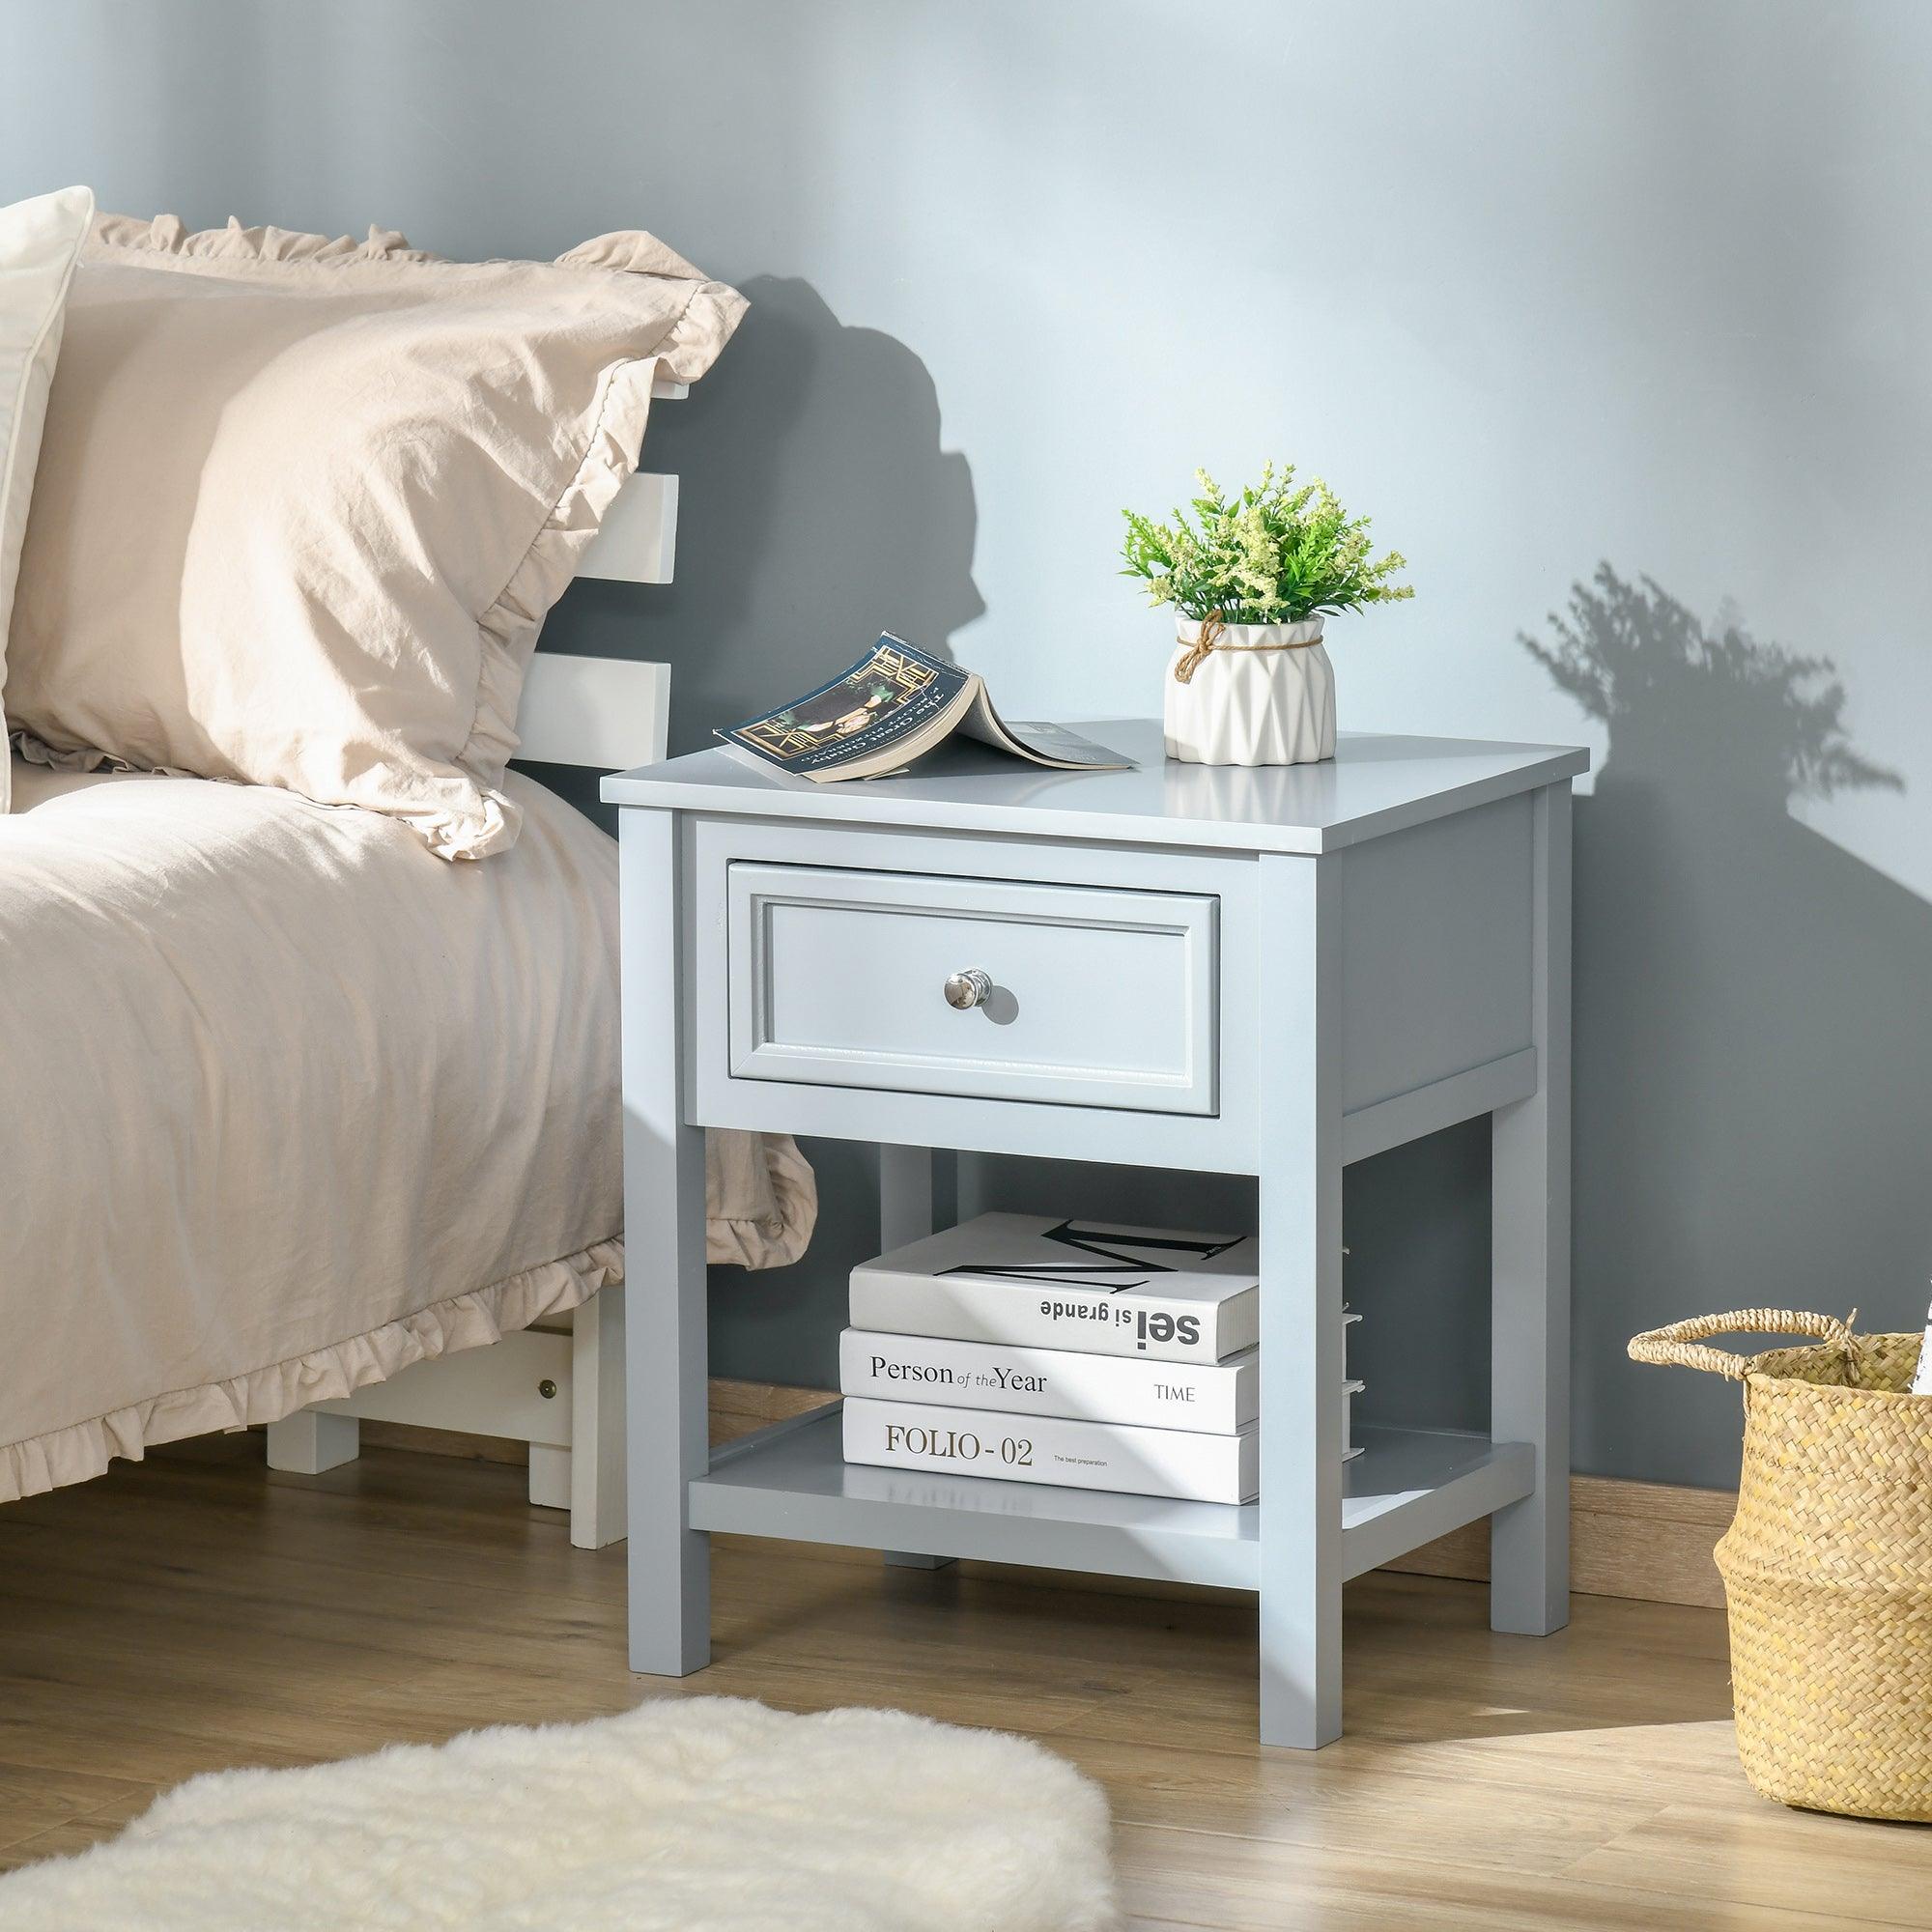 Accent End Table Nightstand with Grey Tabletop, Storage Drawer, and Bottom Shelf, Grey